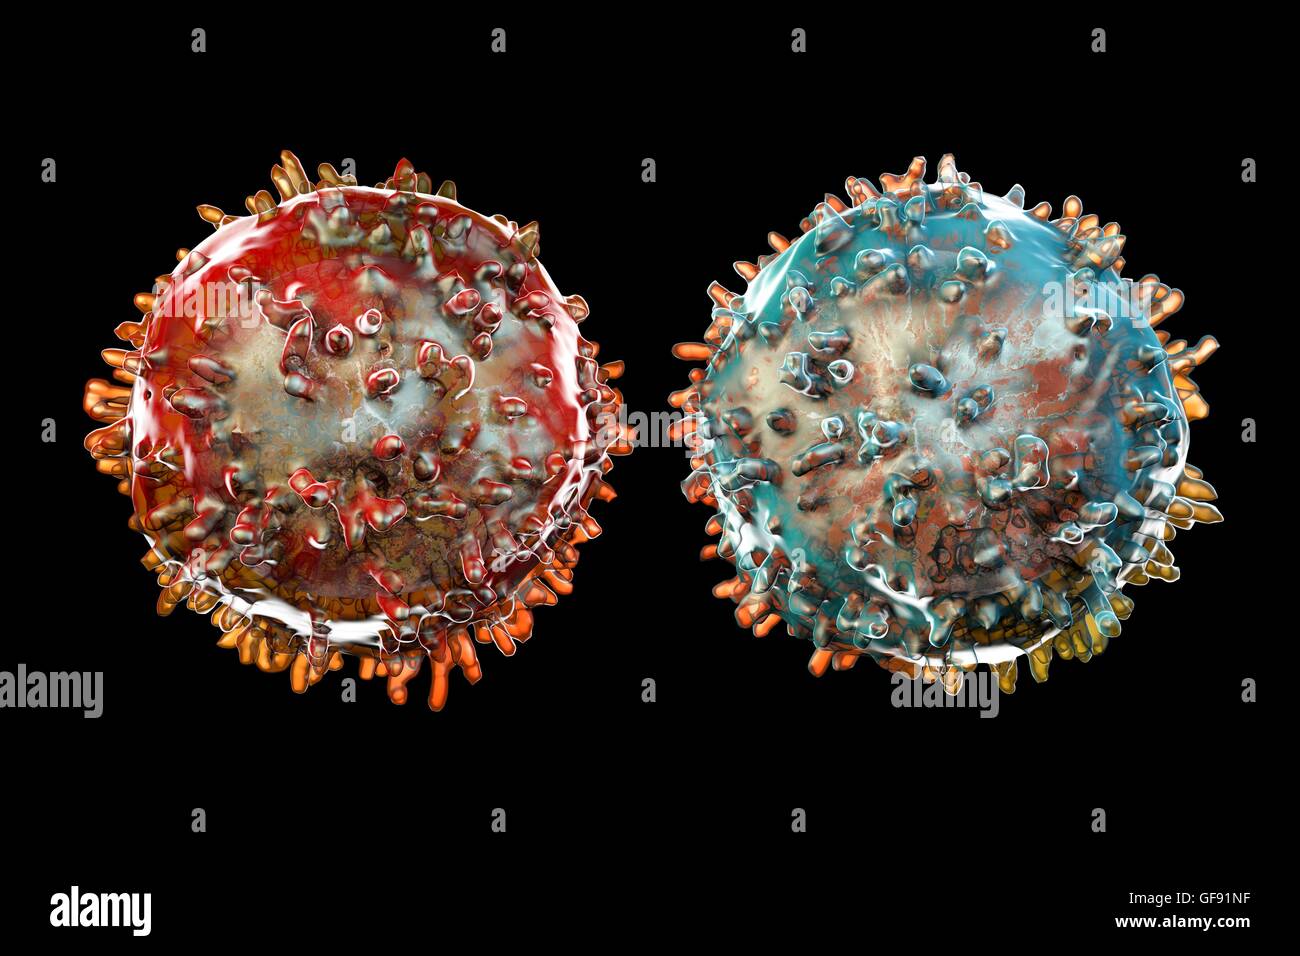 T-lymphocyte (red) and B-lymphocyte (blue), computer artwork. These white blood cells are part of the immune system. B cells mature in bone marrow and are responsible for humoral immunity; they operate by recognising a specific site (antigen) on the surfa Stock Photo